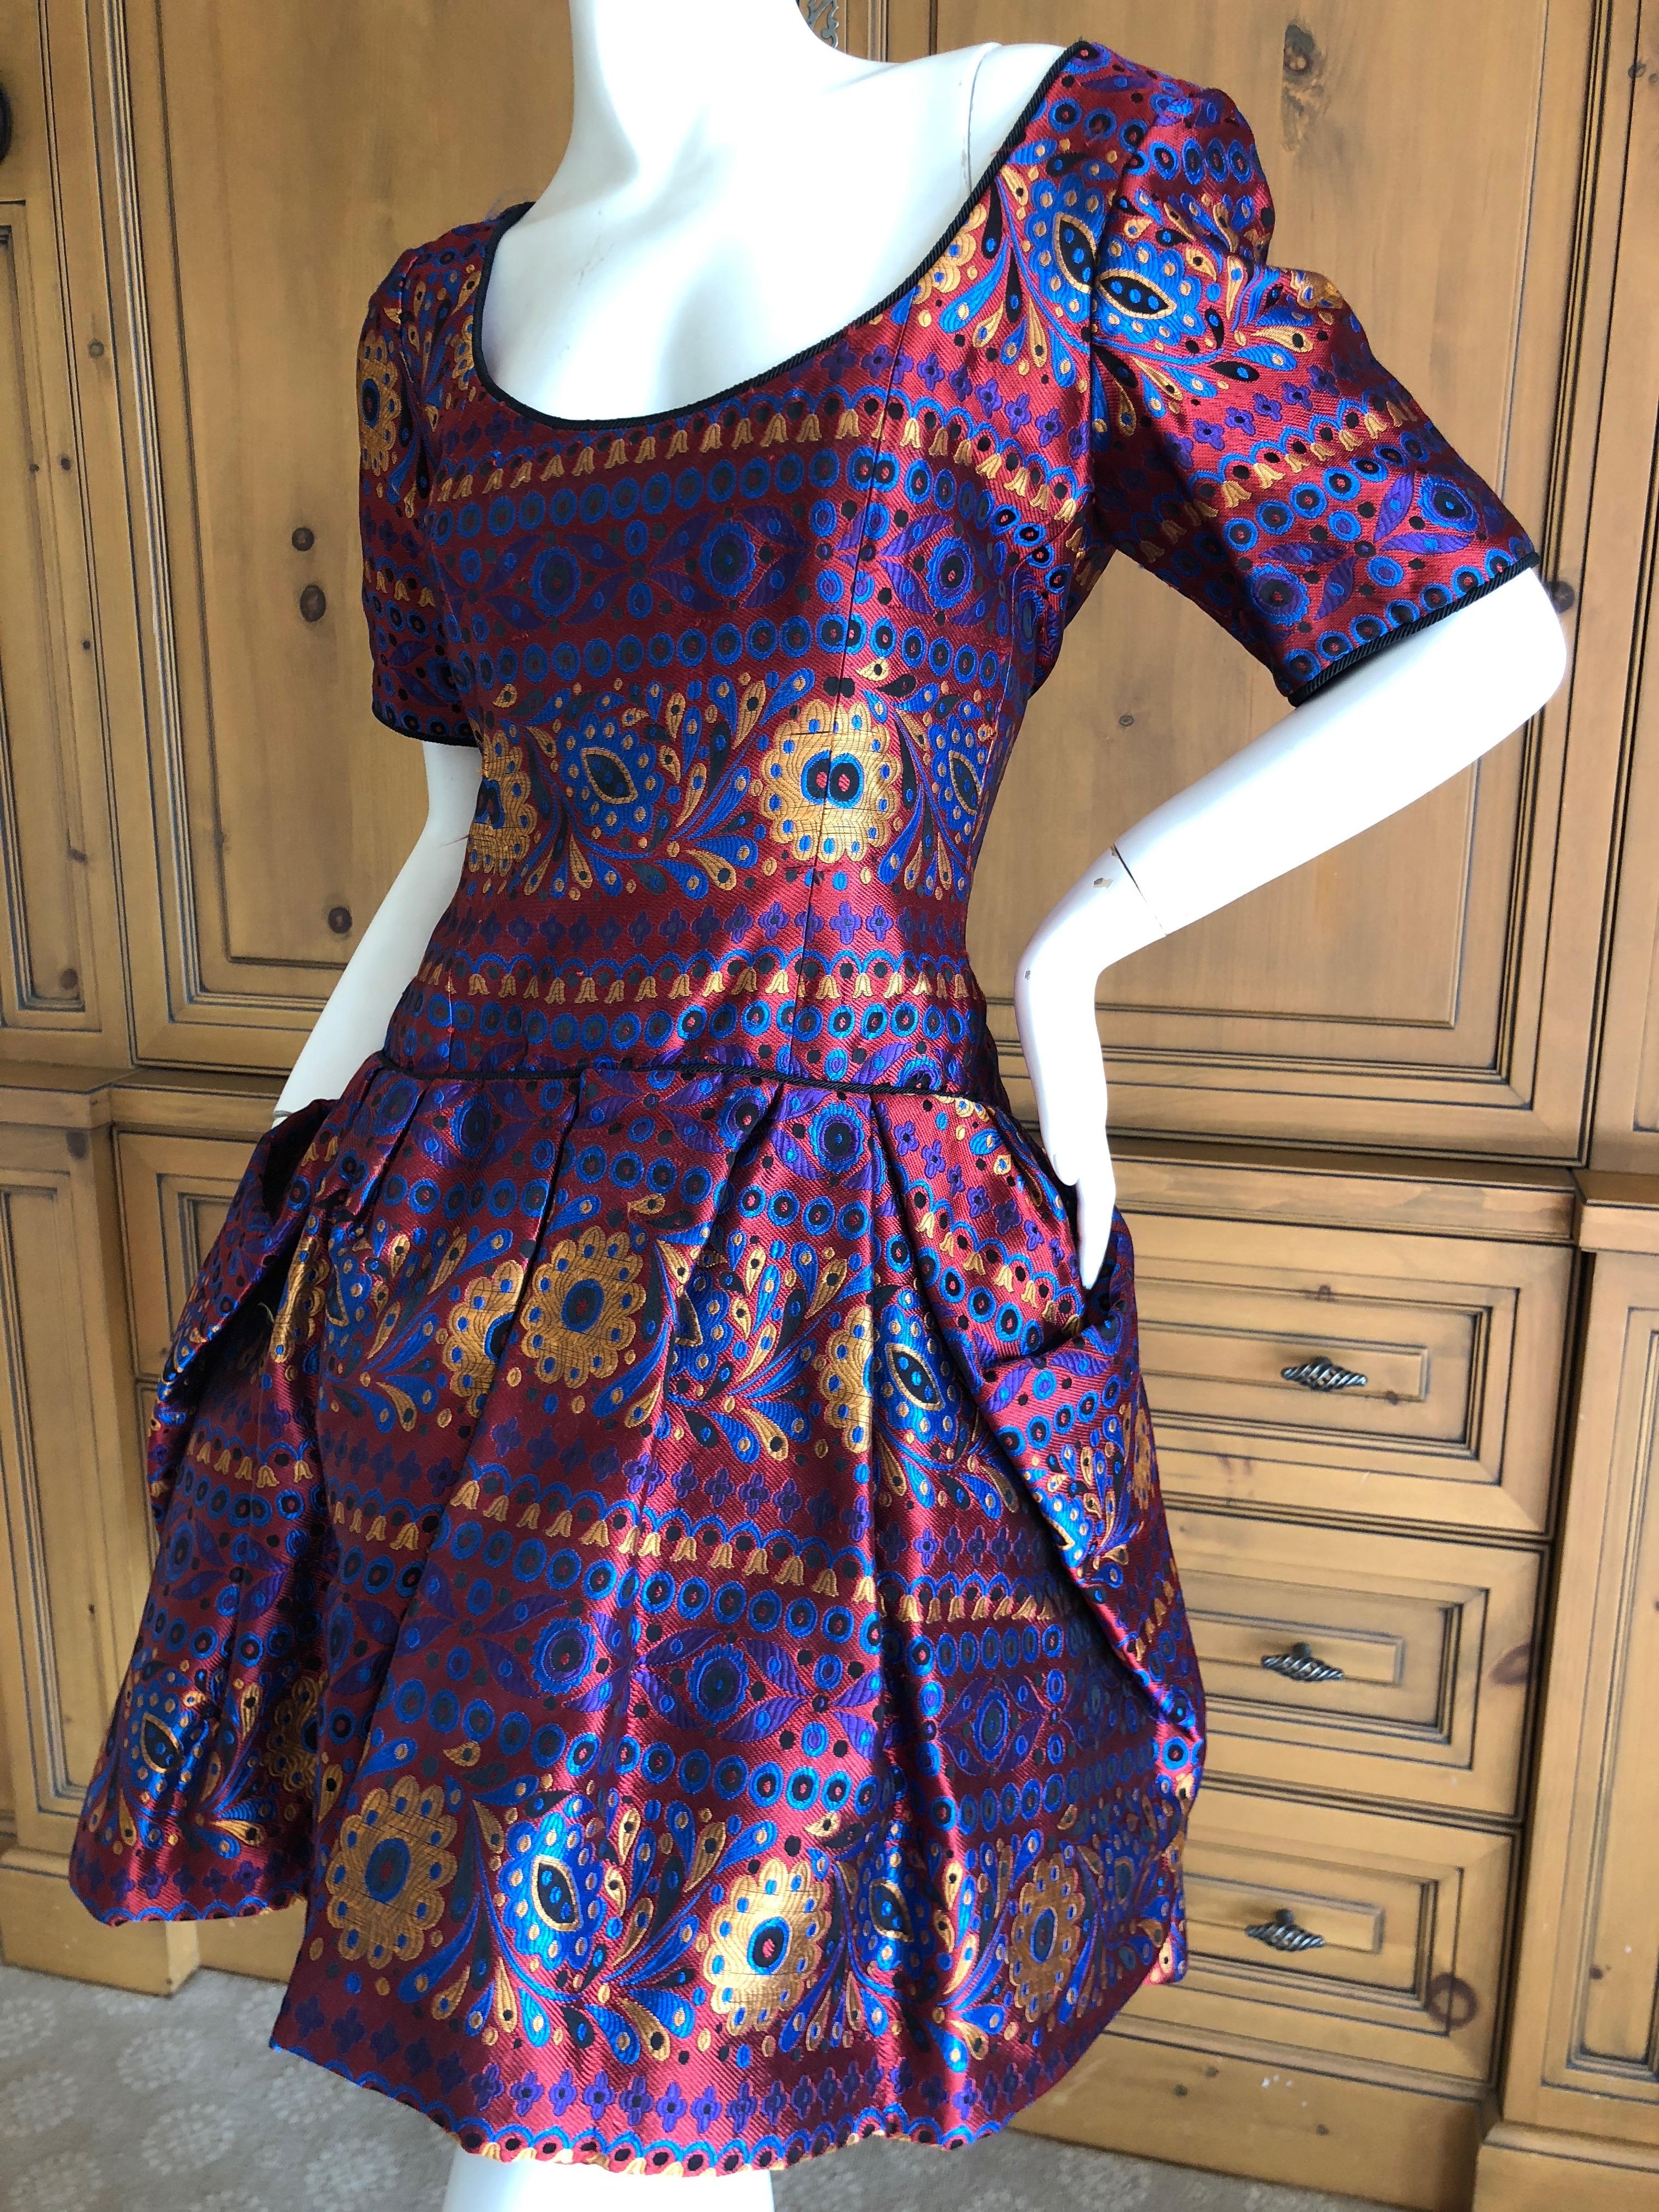 Yves Saint Laurent Rive Gauche '79 Colorful Brocade Bustle Back Cocktail Dress .
So delightfully French. Please use the zoom feature to see details. Much prettier in person.
Size 38
Bust 36